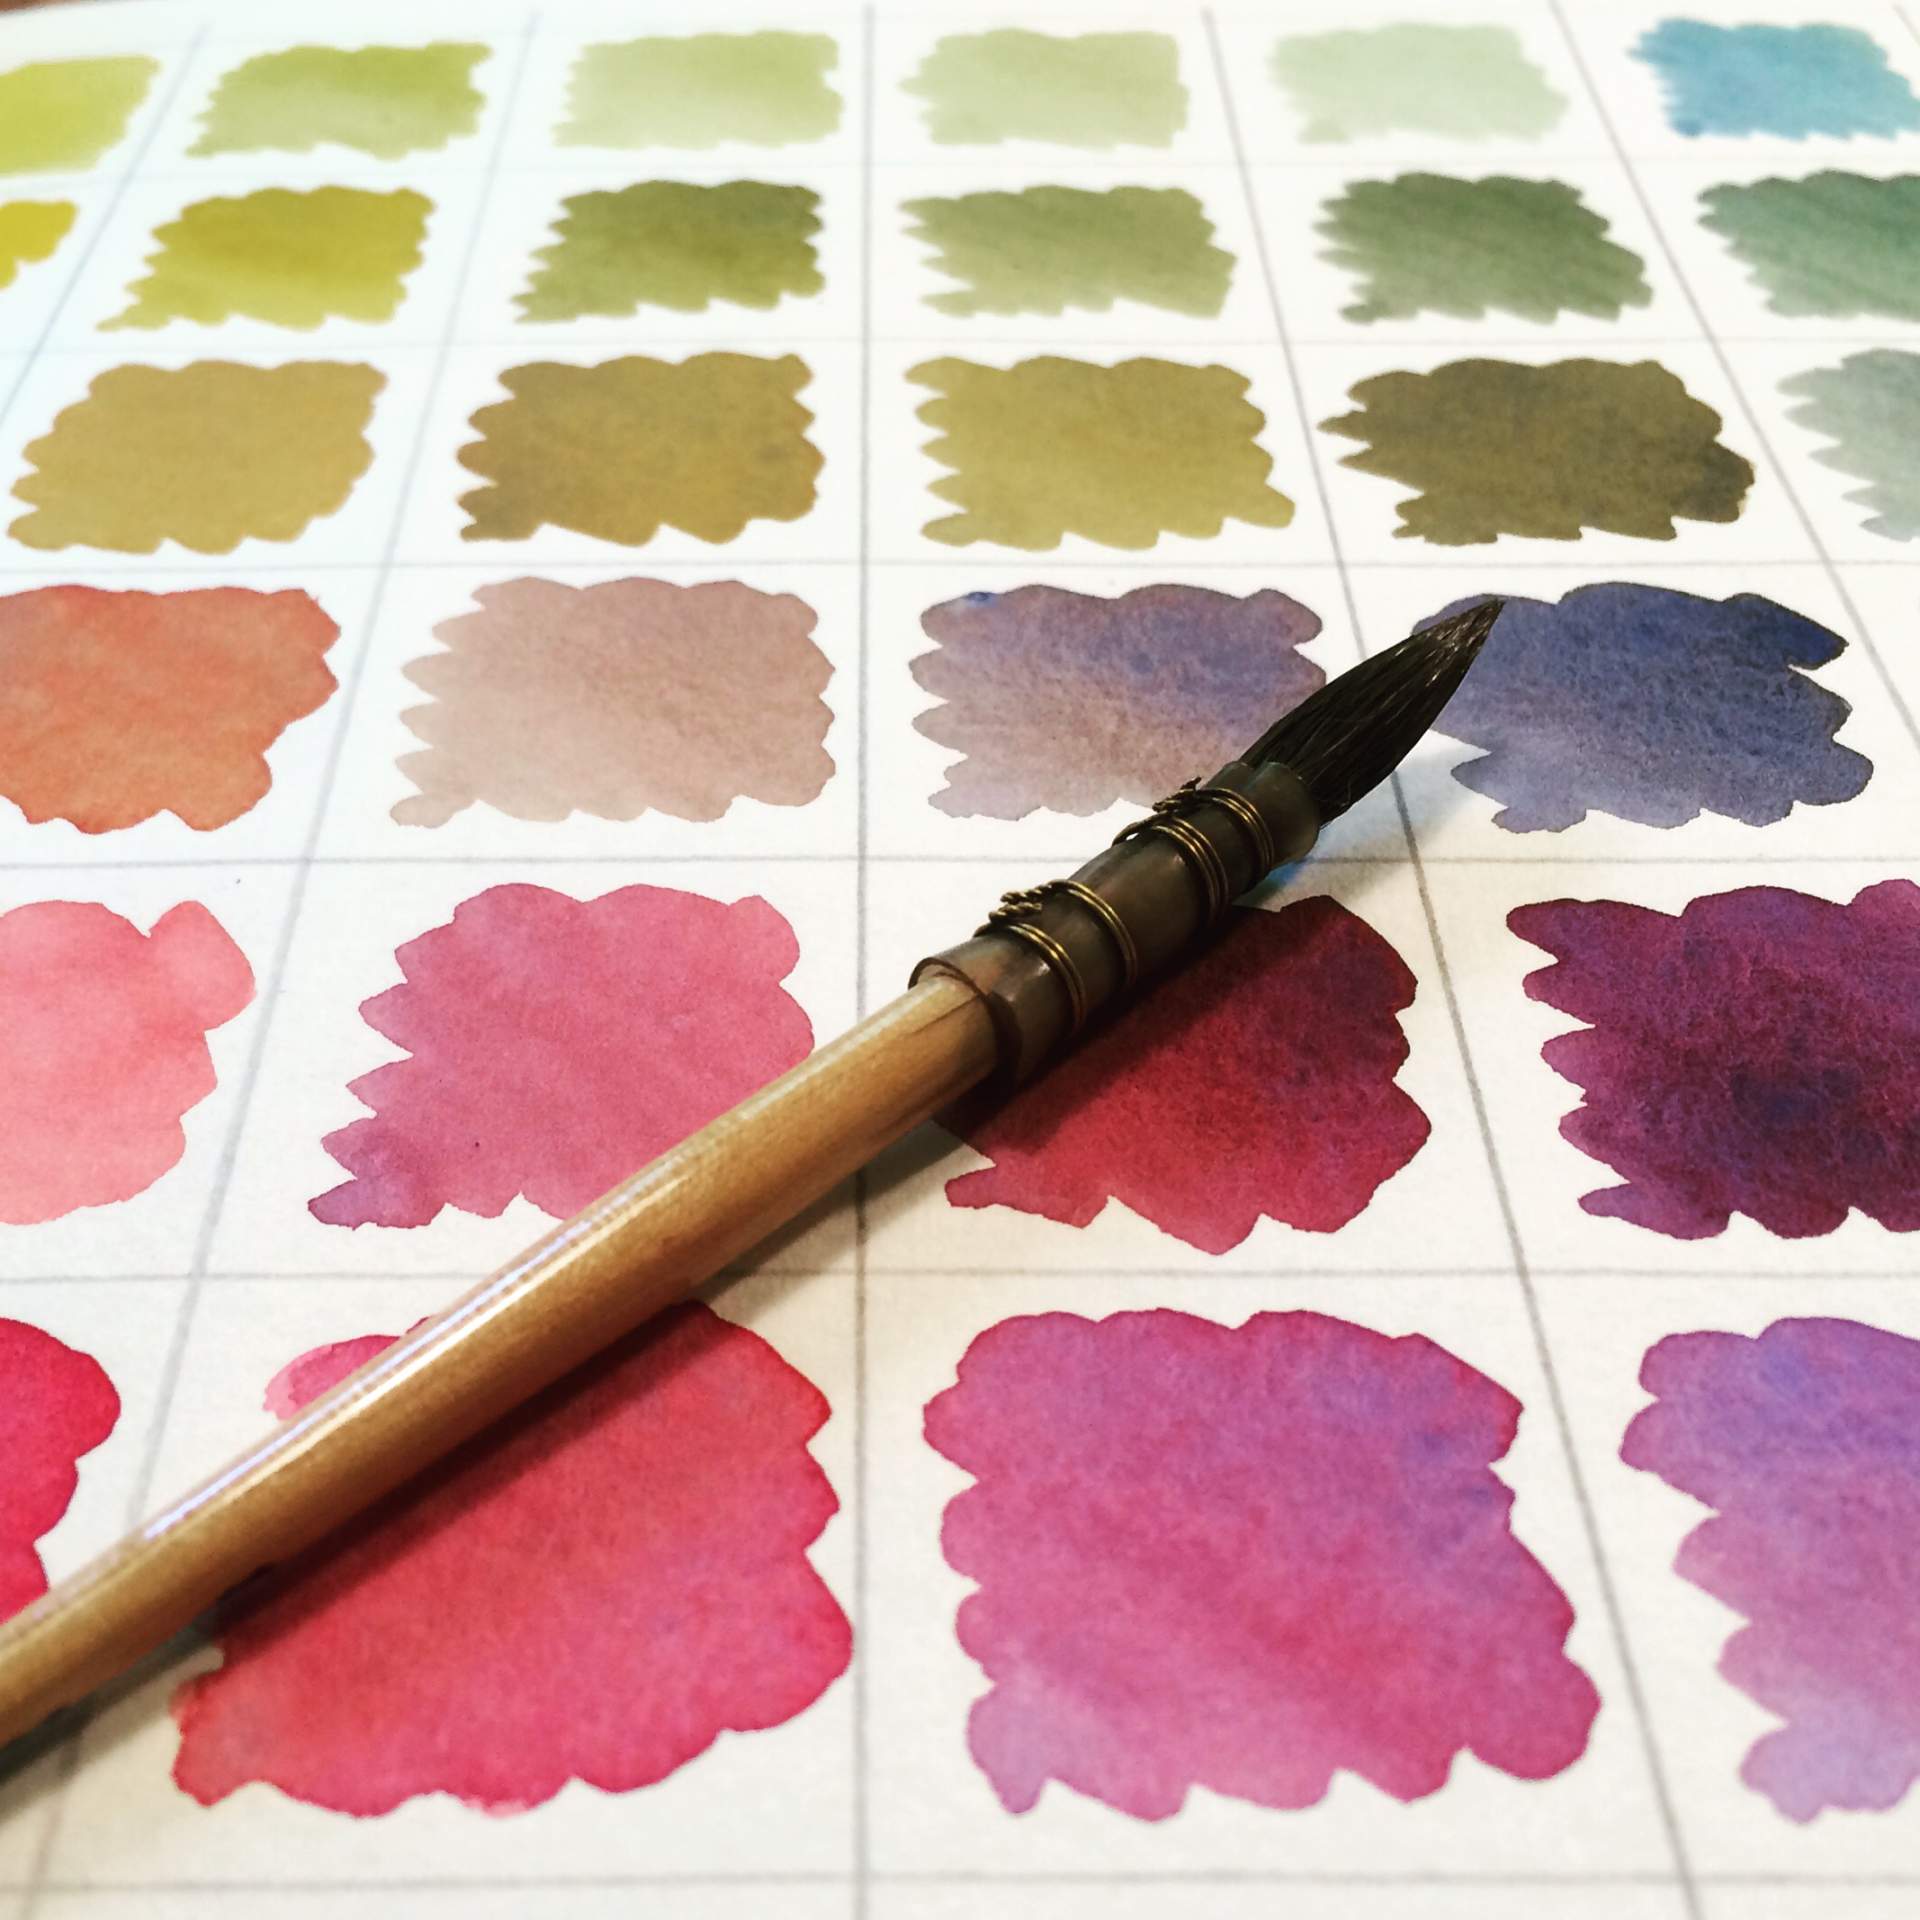 Colour Charts are a way to explore the palette and hold the key to future mixes